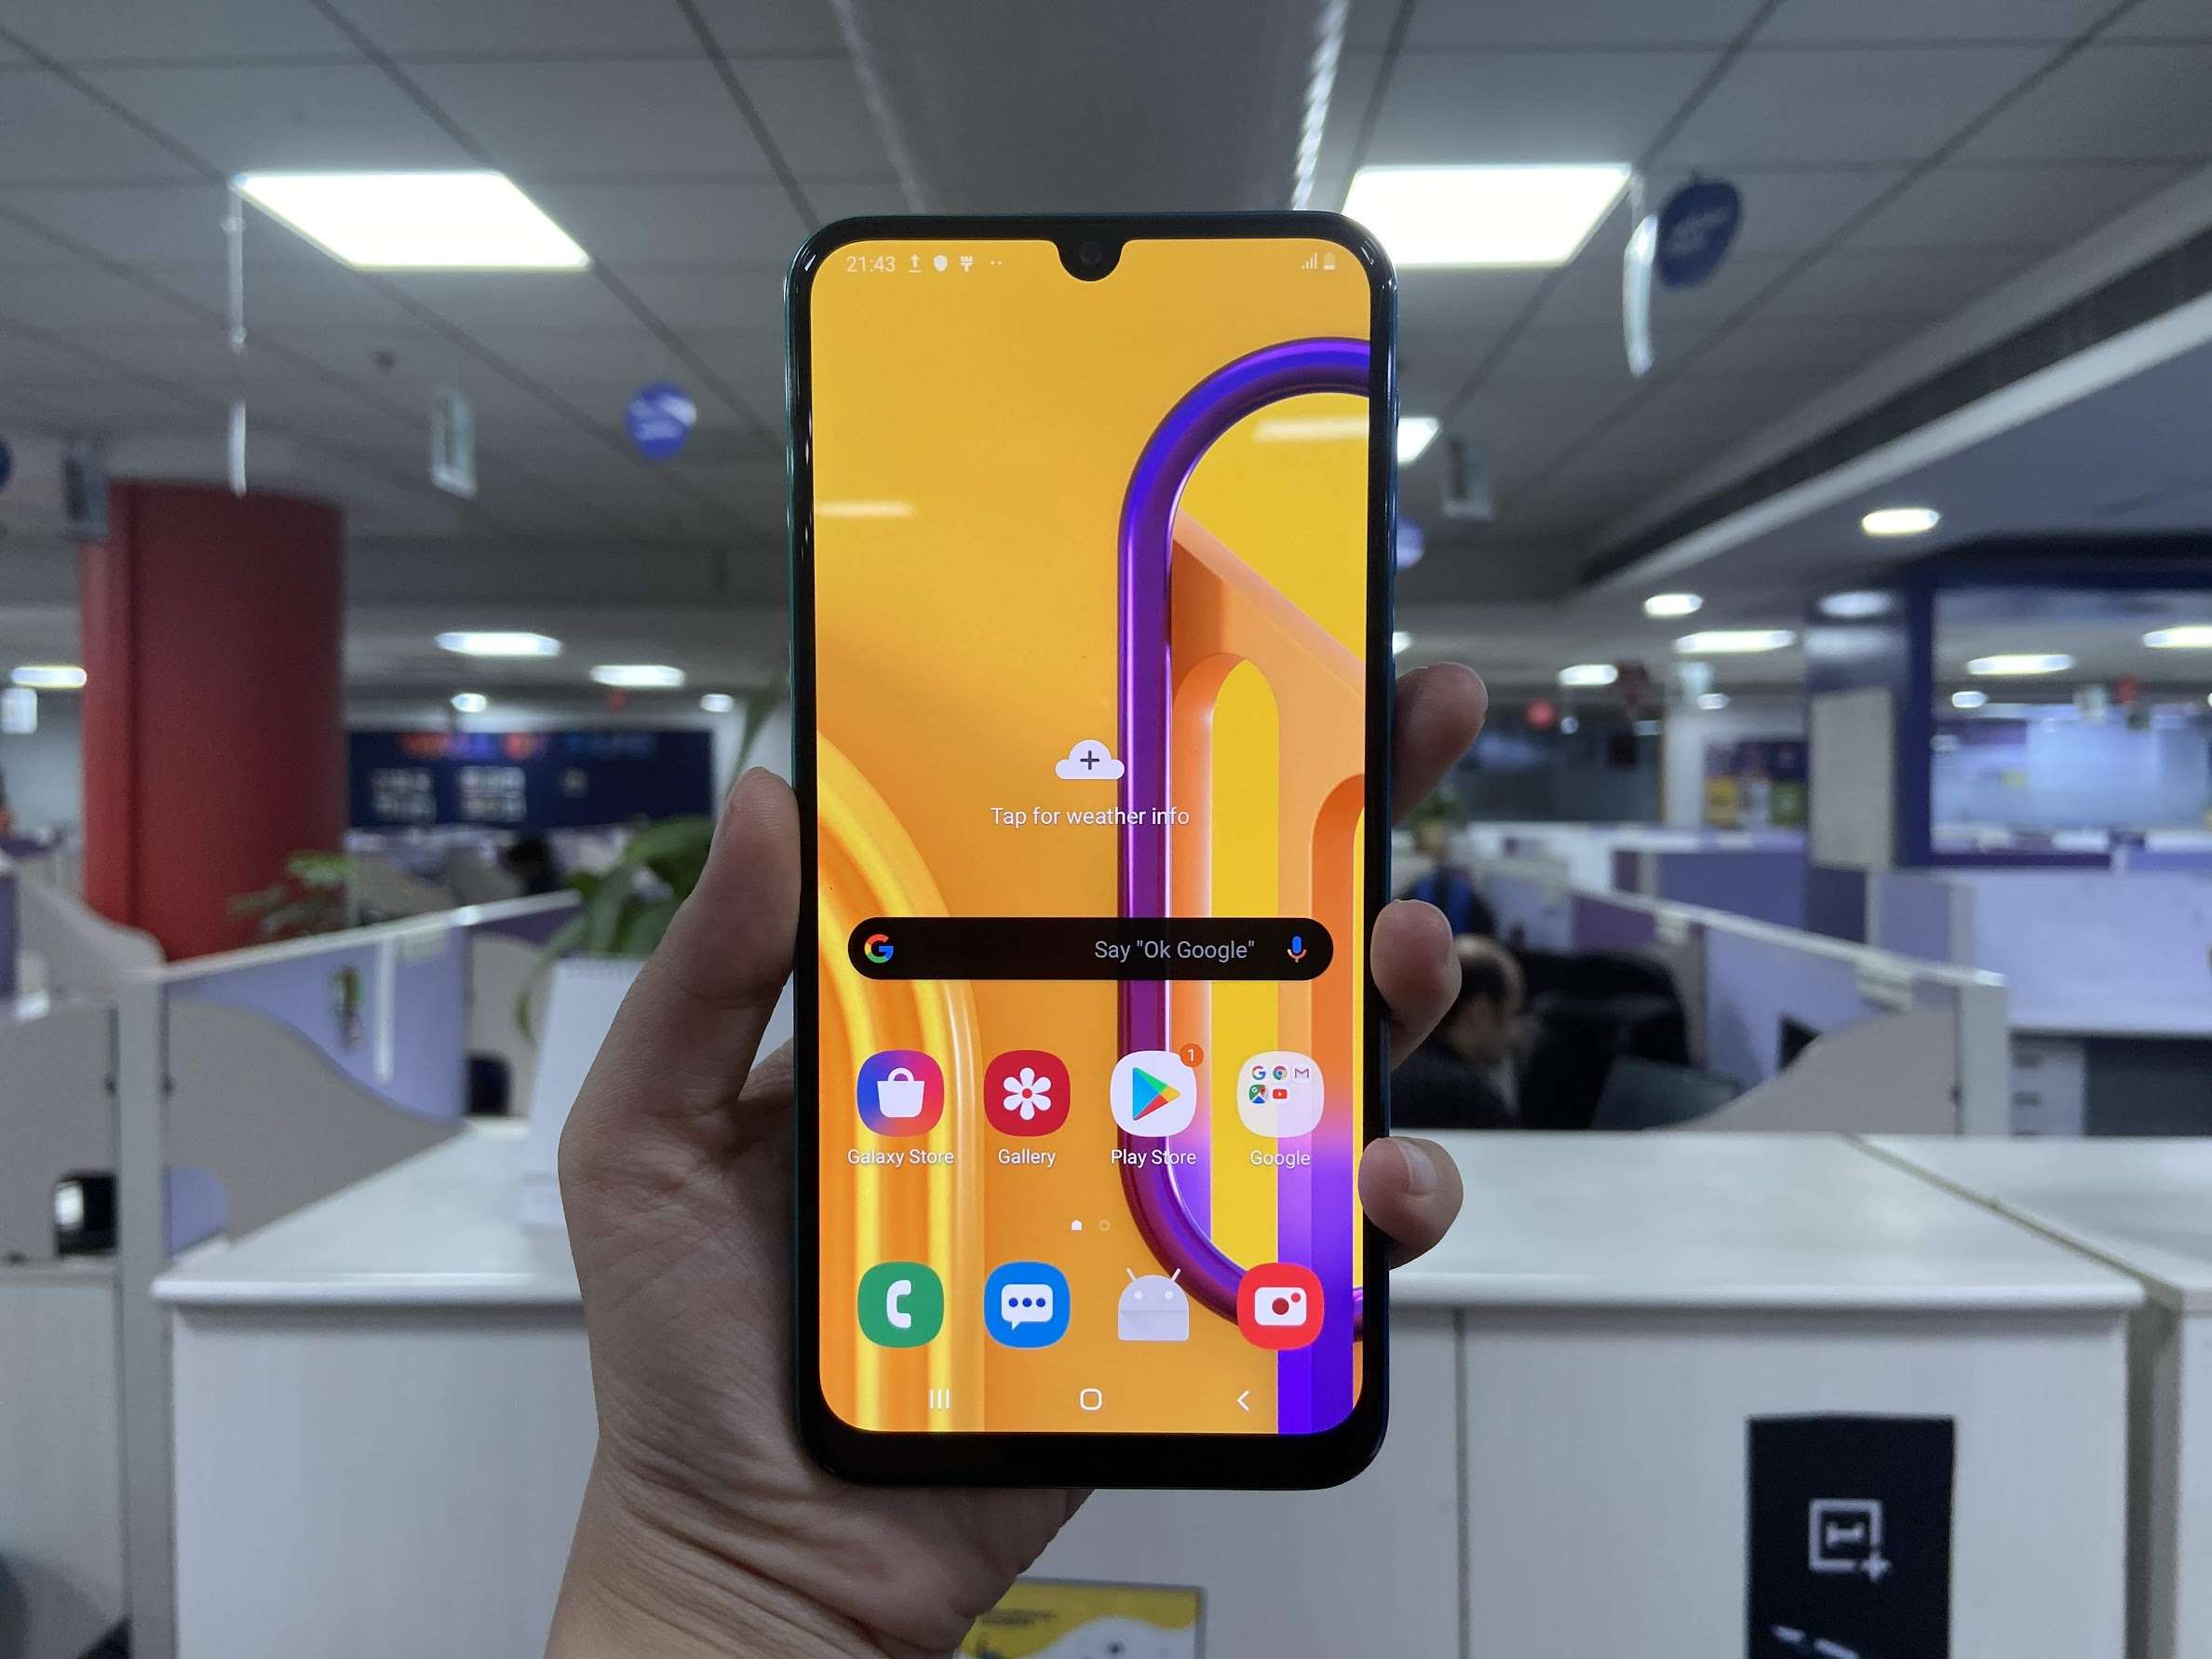 Samsung Galaxy M30s - Price in India, Full Specifications & Features (5th Nov 2020) at Gadgets Now